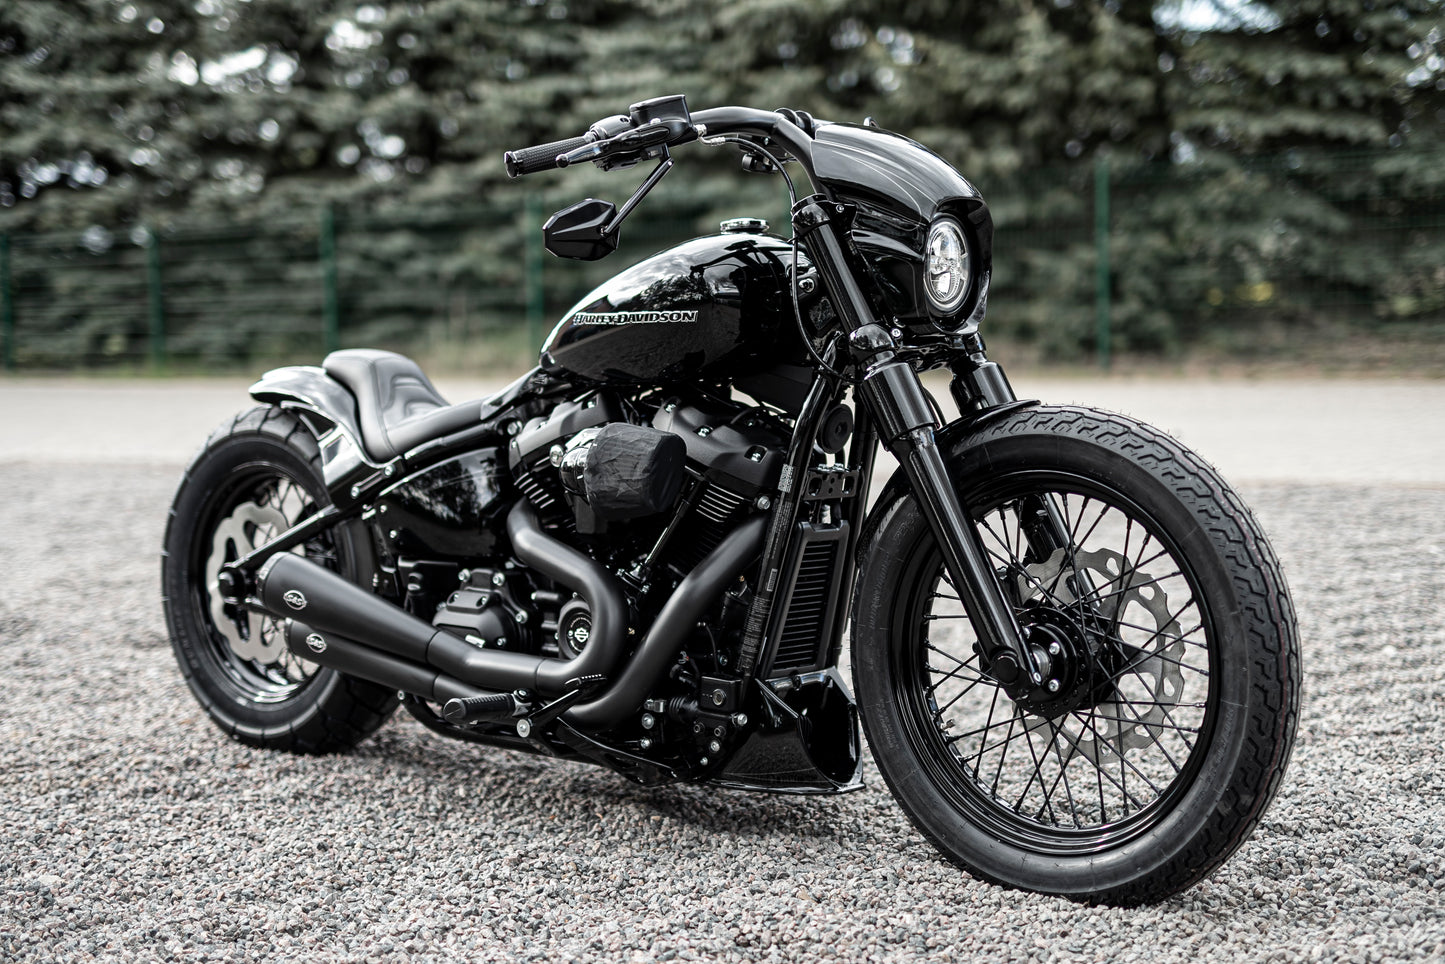 Harley Davidson motorcycle with Killer Custom front fork lowering kit from the side with some trees in the background